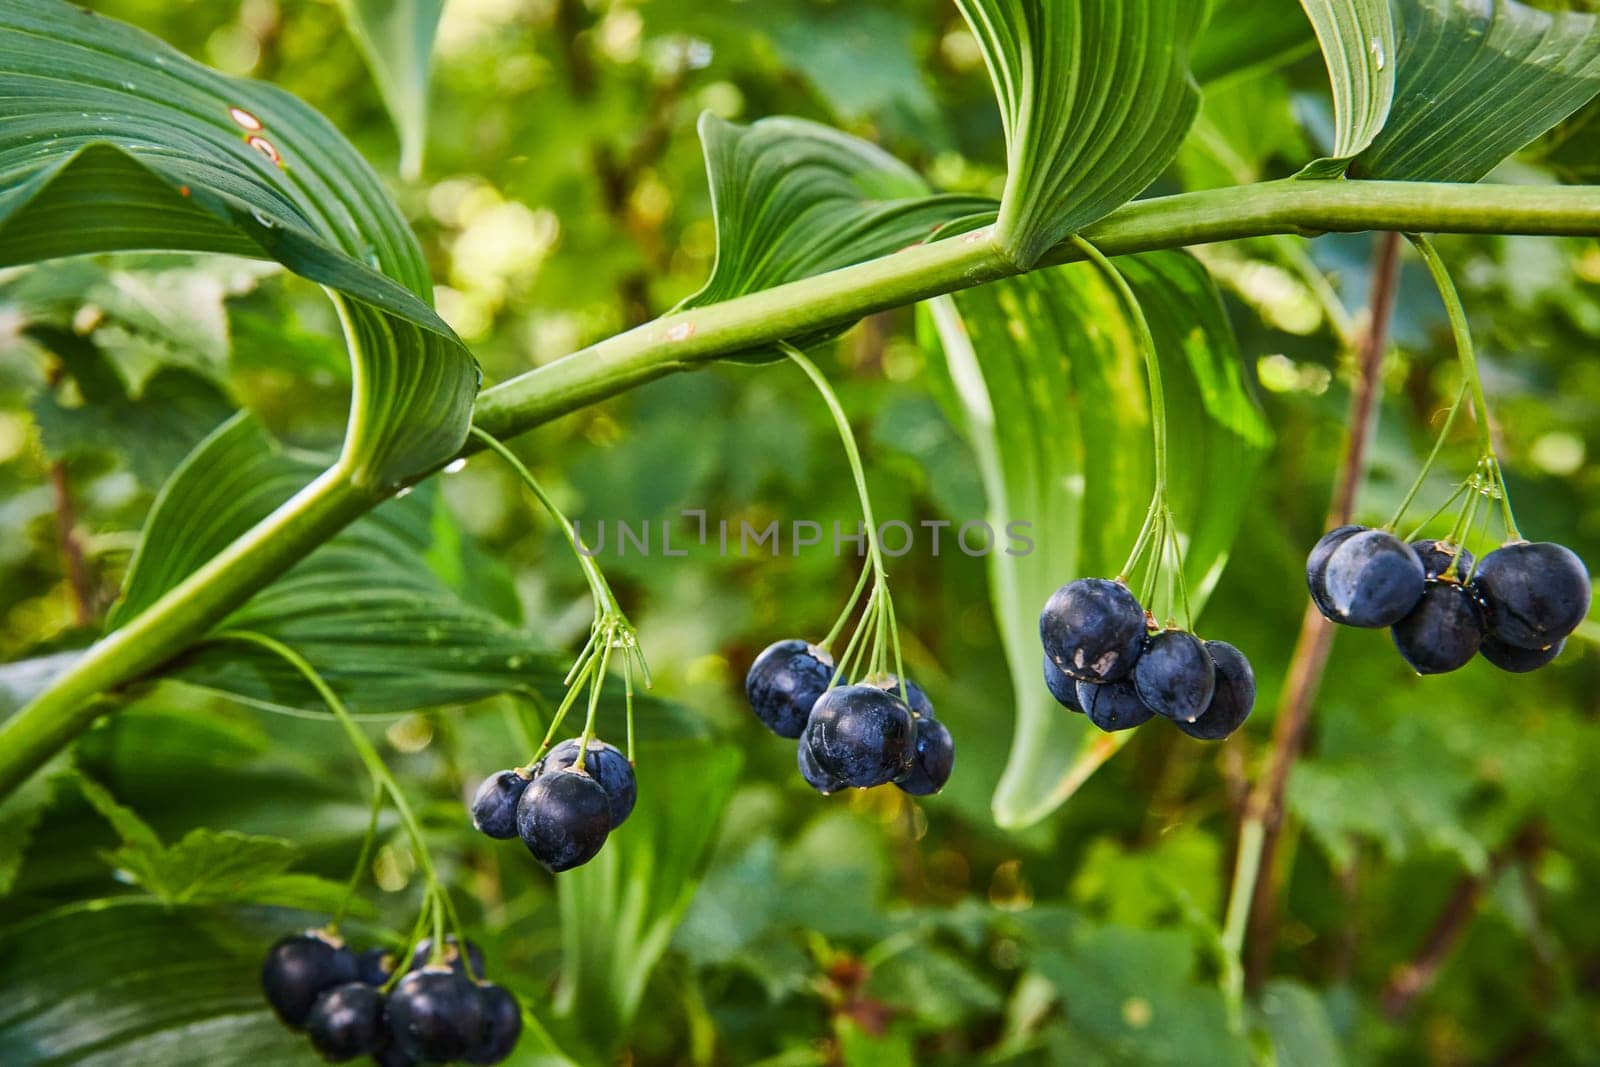 Sunlit Ripe Blueberries on Plant at Elkhart Indiana Botanic Gardens, Symbol of Organic Farming and Healthy Eating, 2023